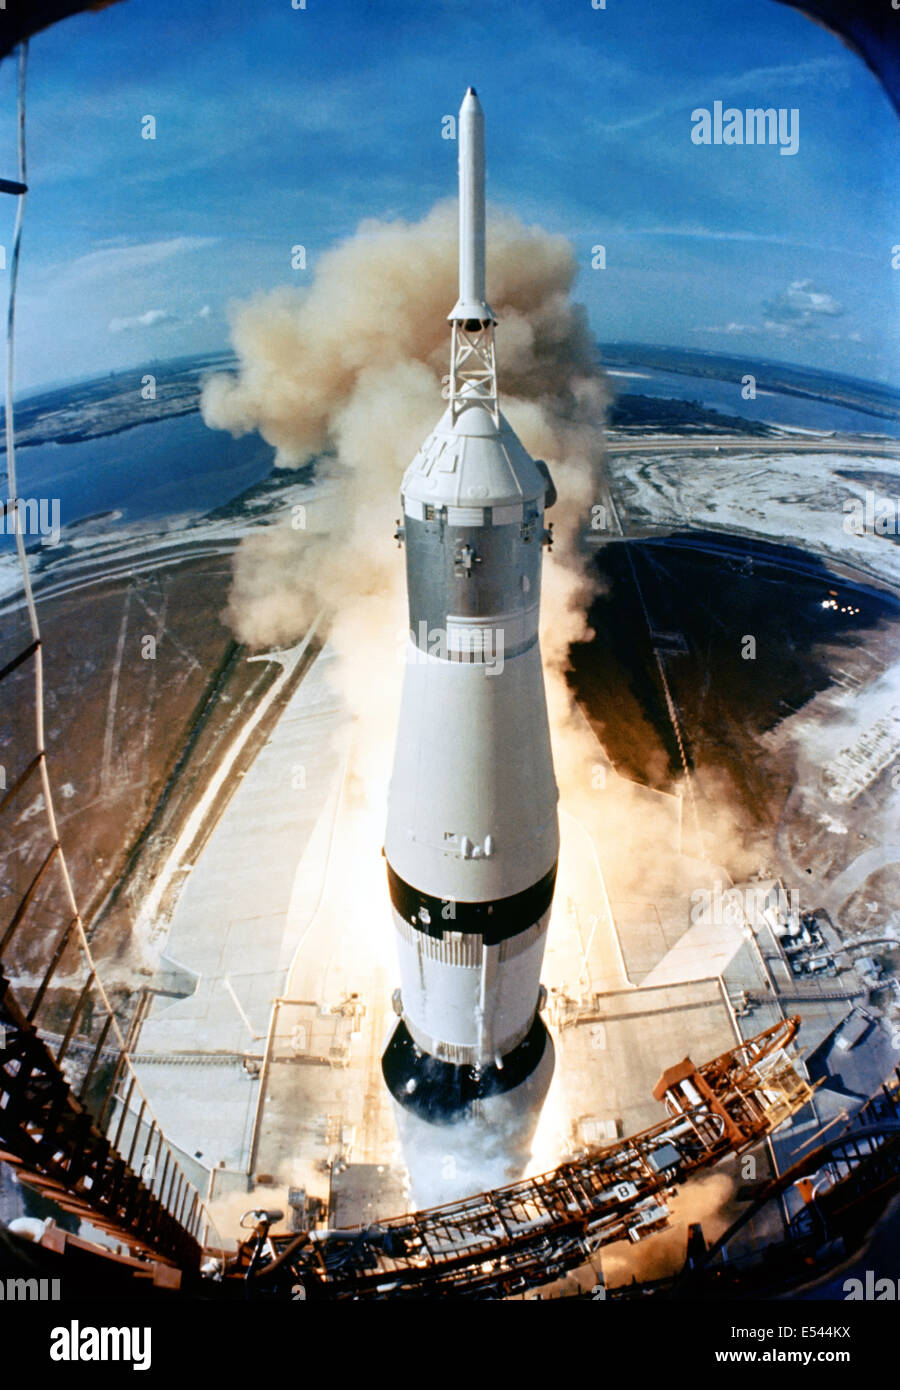 The 363-feet tall Saturn V rocket launches on the Apollo 11 mission from Pad A, Launch Complex 39, Kennedy Space Center, at 9:32 a.m. EDT July 16, 1969 in Cape Canaveral, Florida. Onboard the Apollo 11 spacecraft are astronauts Neil A. Armstrong, commander; Michael Collins, command module pilot; and Edwin E. Aldrin Jr., lunar module pilot. Apollo 11 was the United States' first lunar landing mission. Stock Photo